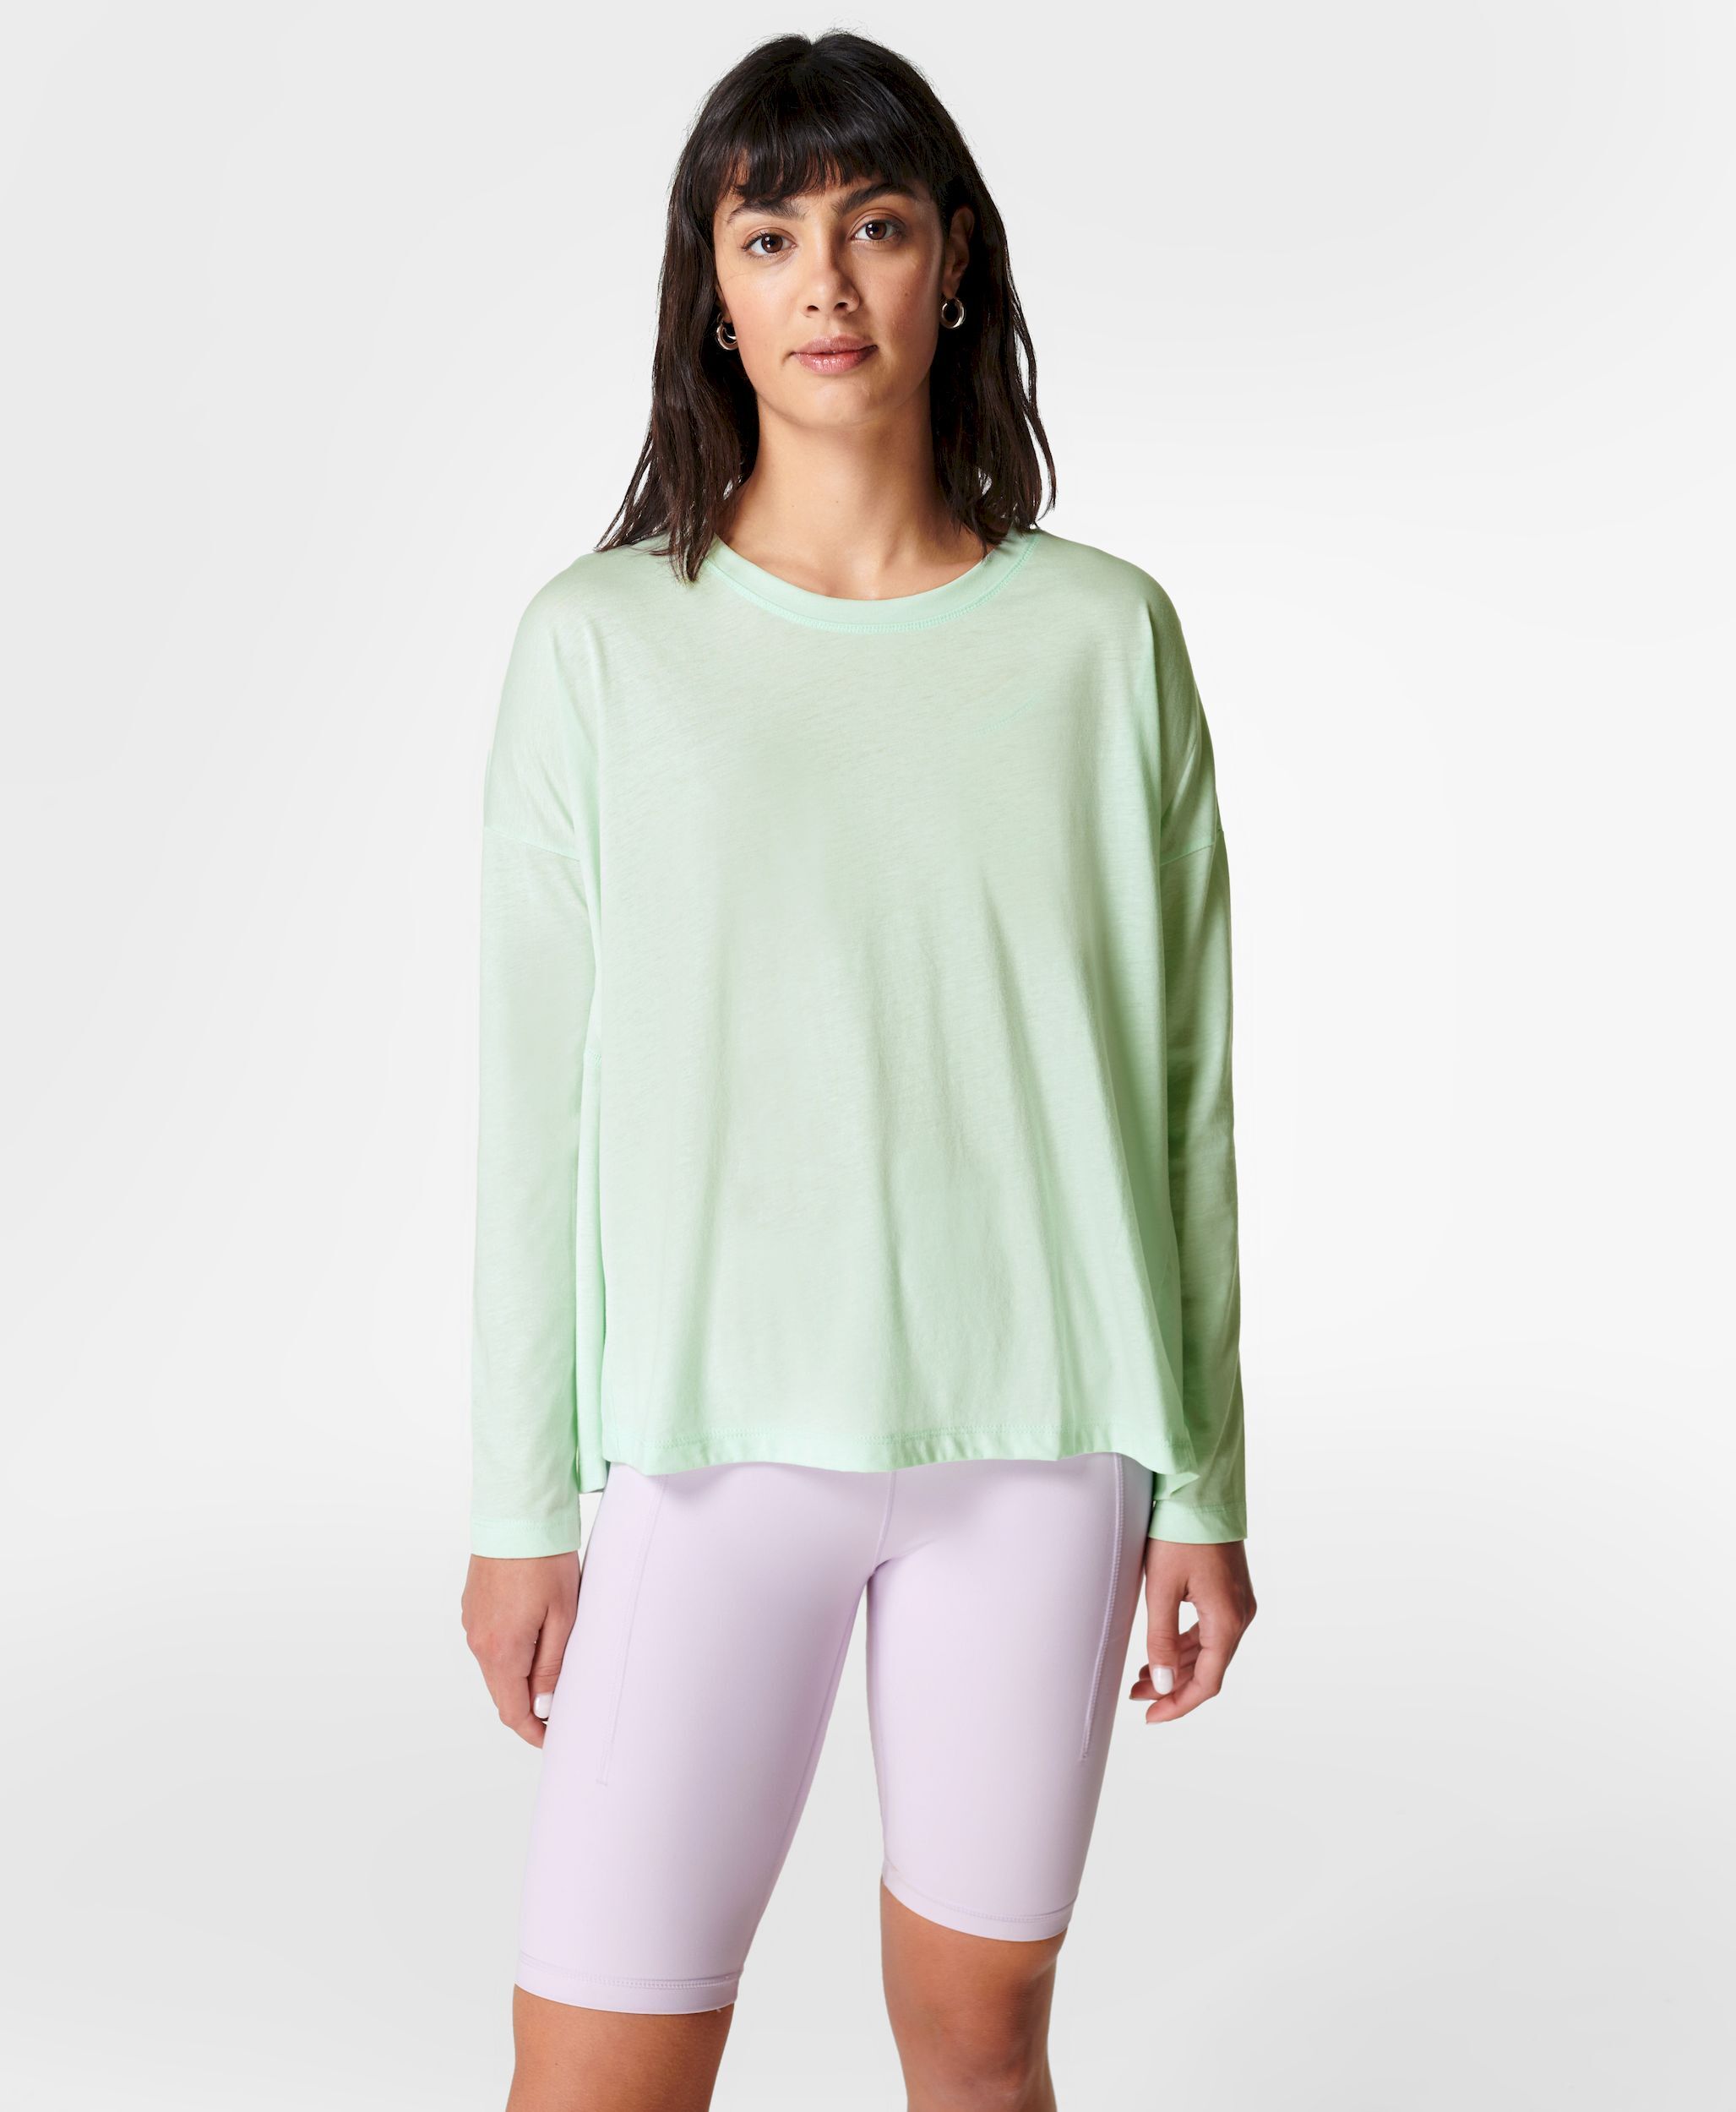 Sweaty Betty Easy Peazy Sustainable Top - T-shirt - Damer